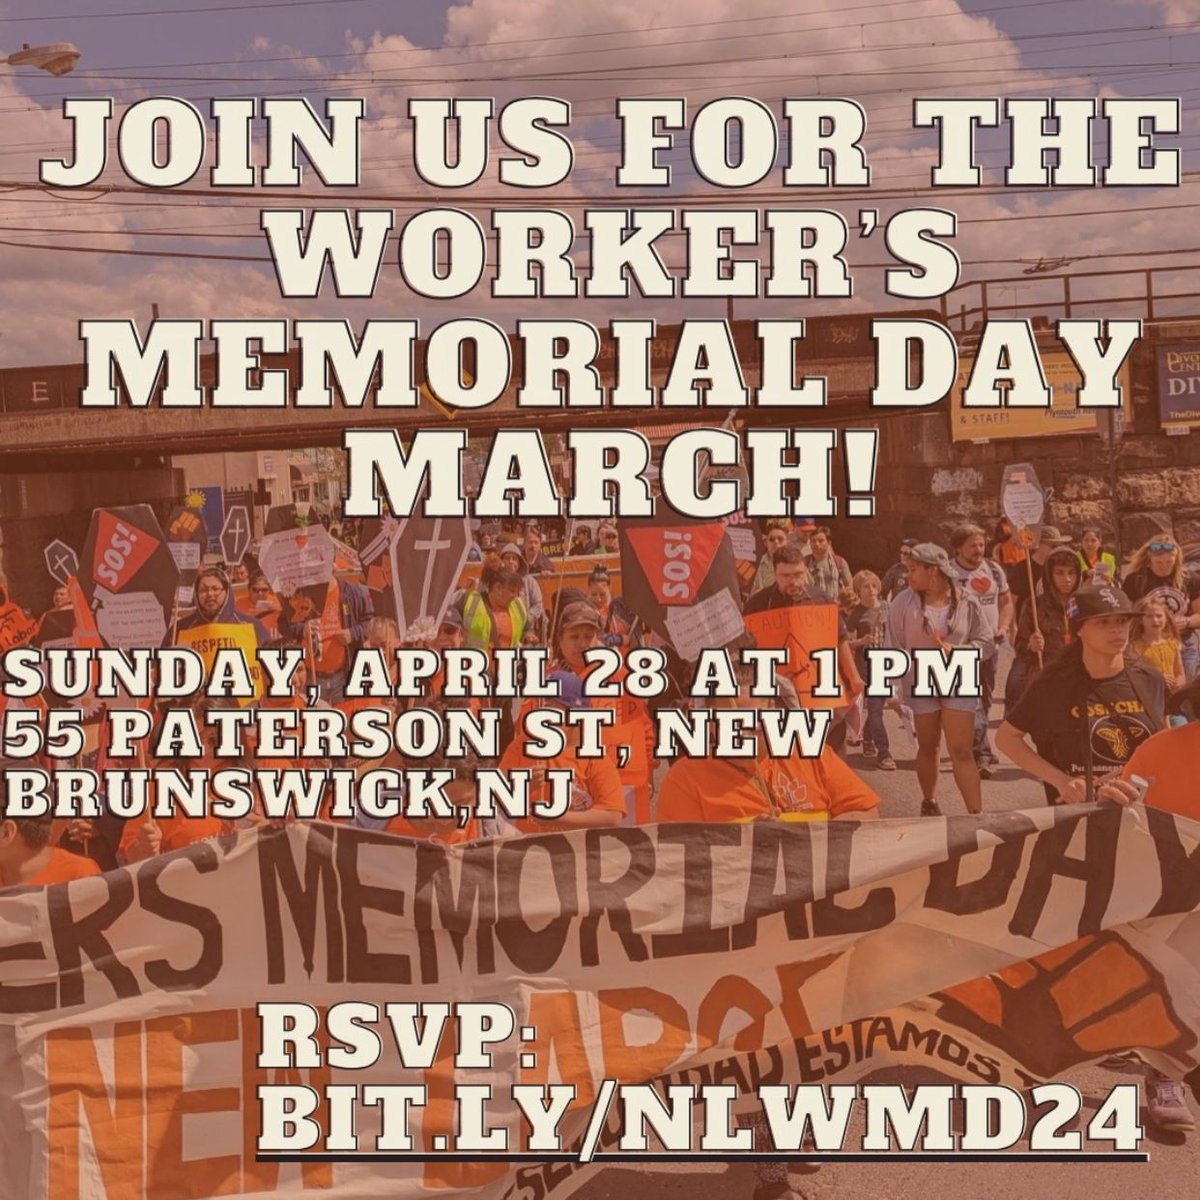 Today at 1pm EST! Join @NewLabor for the Worker's Memorial Day March in NJ! RSVP here: buff.ly/4a10Weq